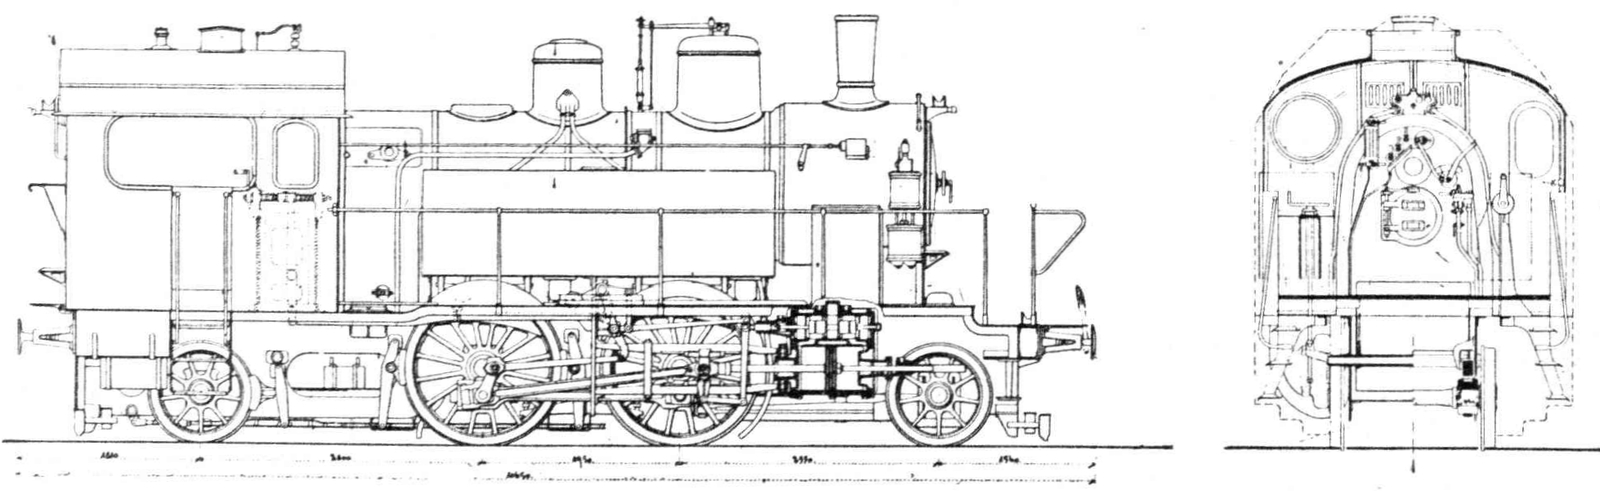 Schematical drawing of the first version